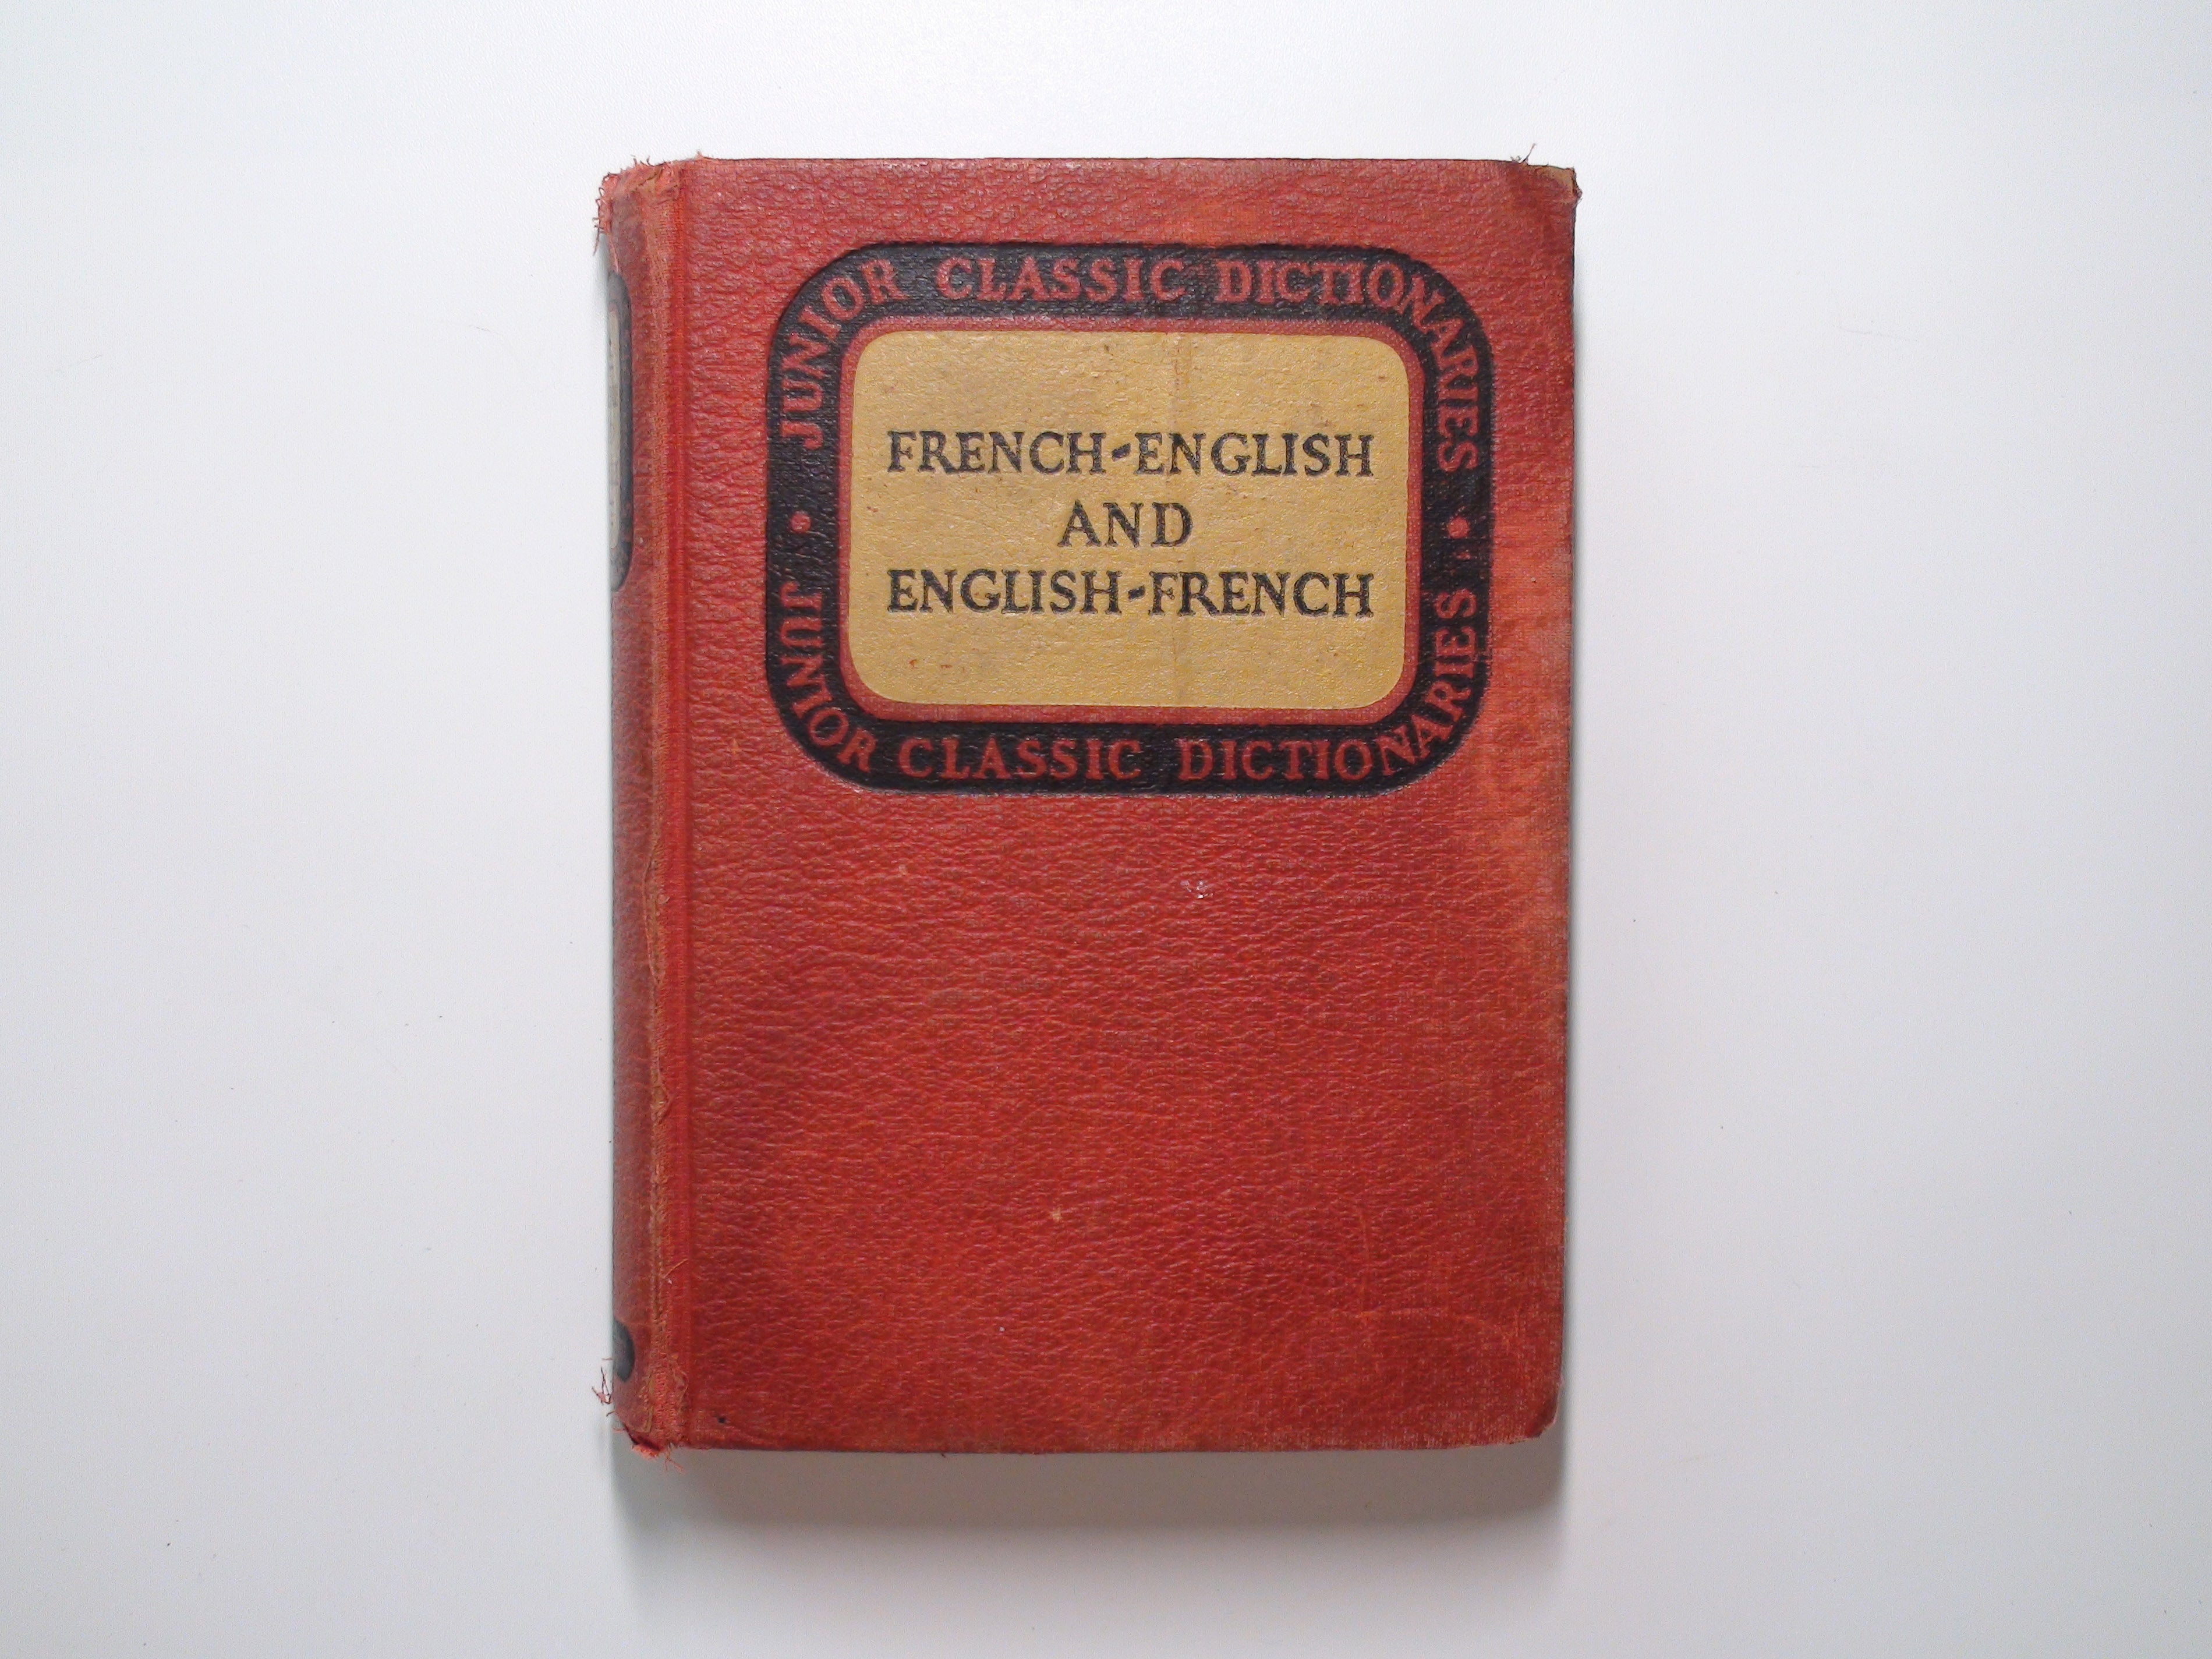 Junior Classic French Dictionary by J. E. Wessely, Rev. Ed, Follett, 1947